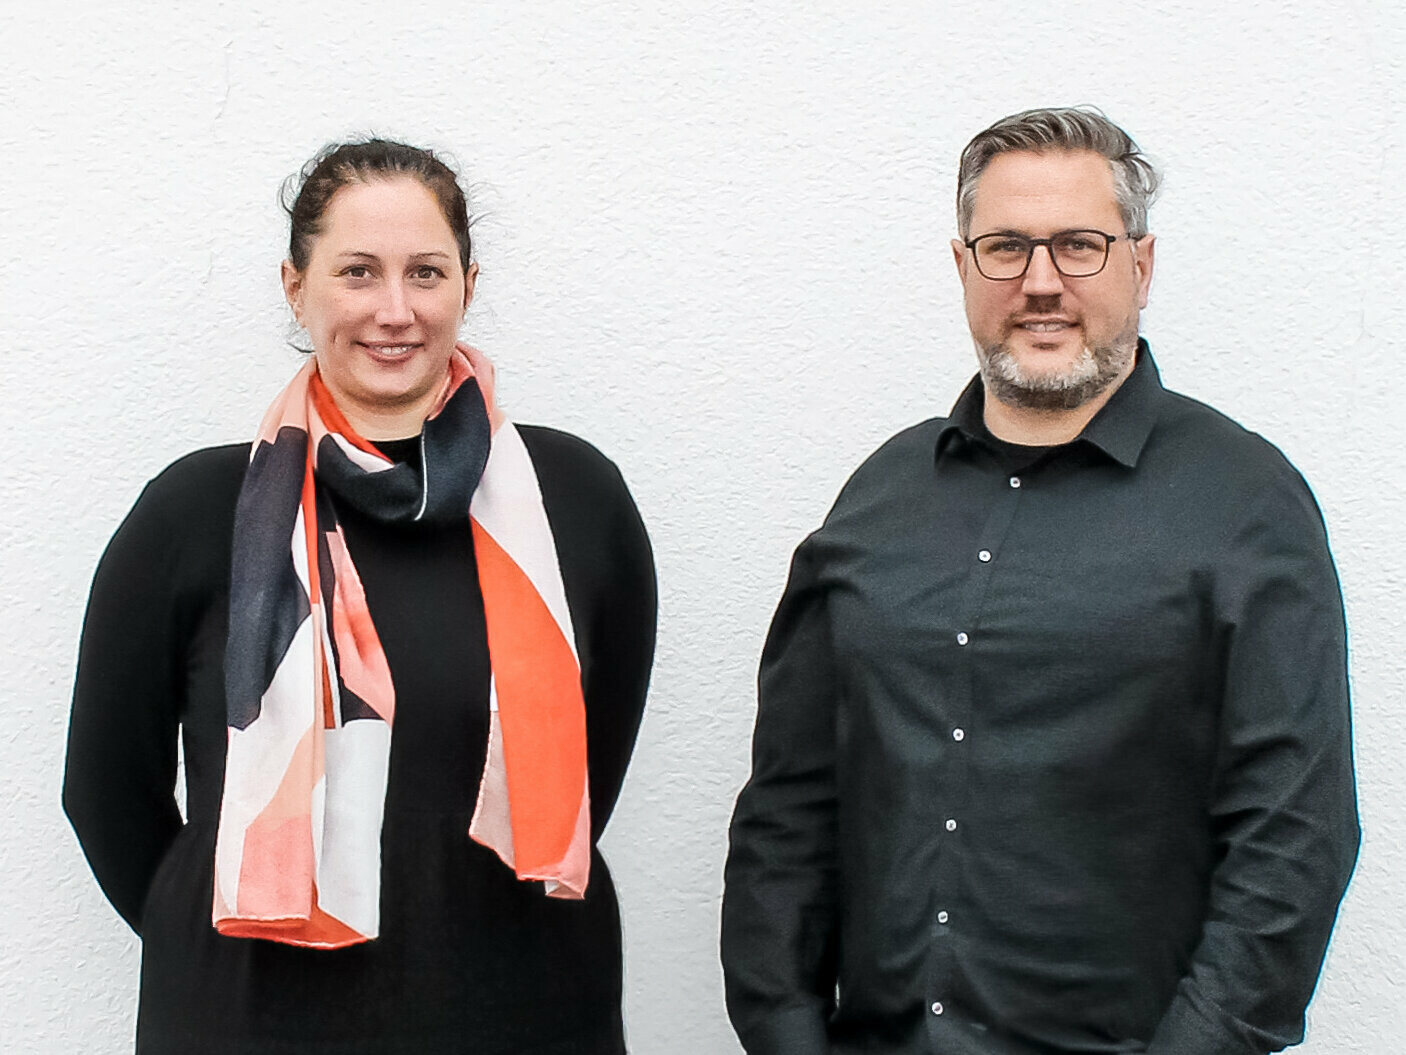 Portrait of the siblings Nathalie and Marc Bodarwé of BODARWE Architektur standing in front of a white plastered wall.